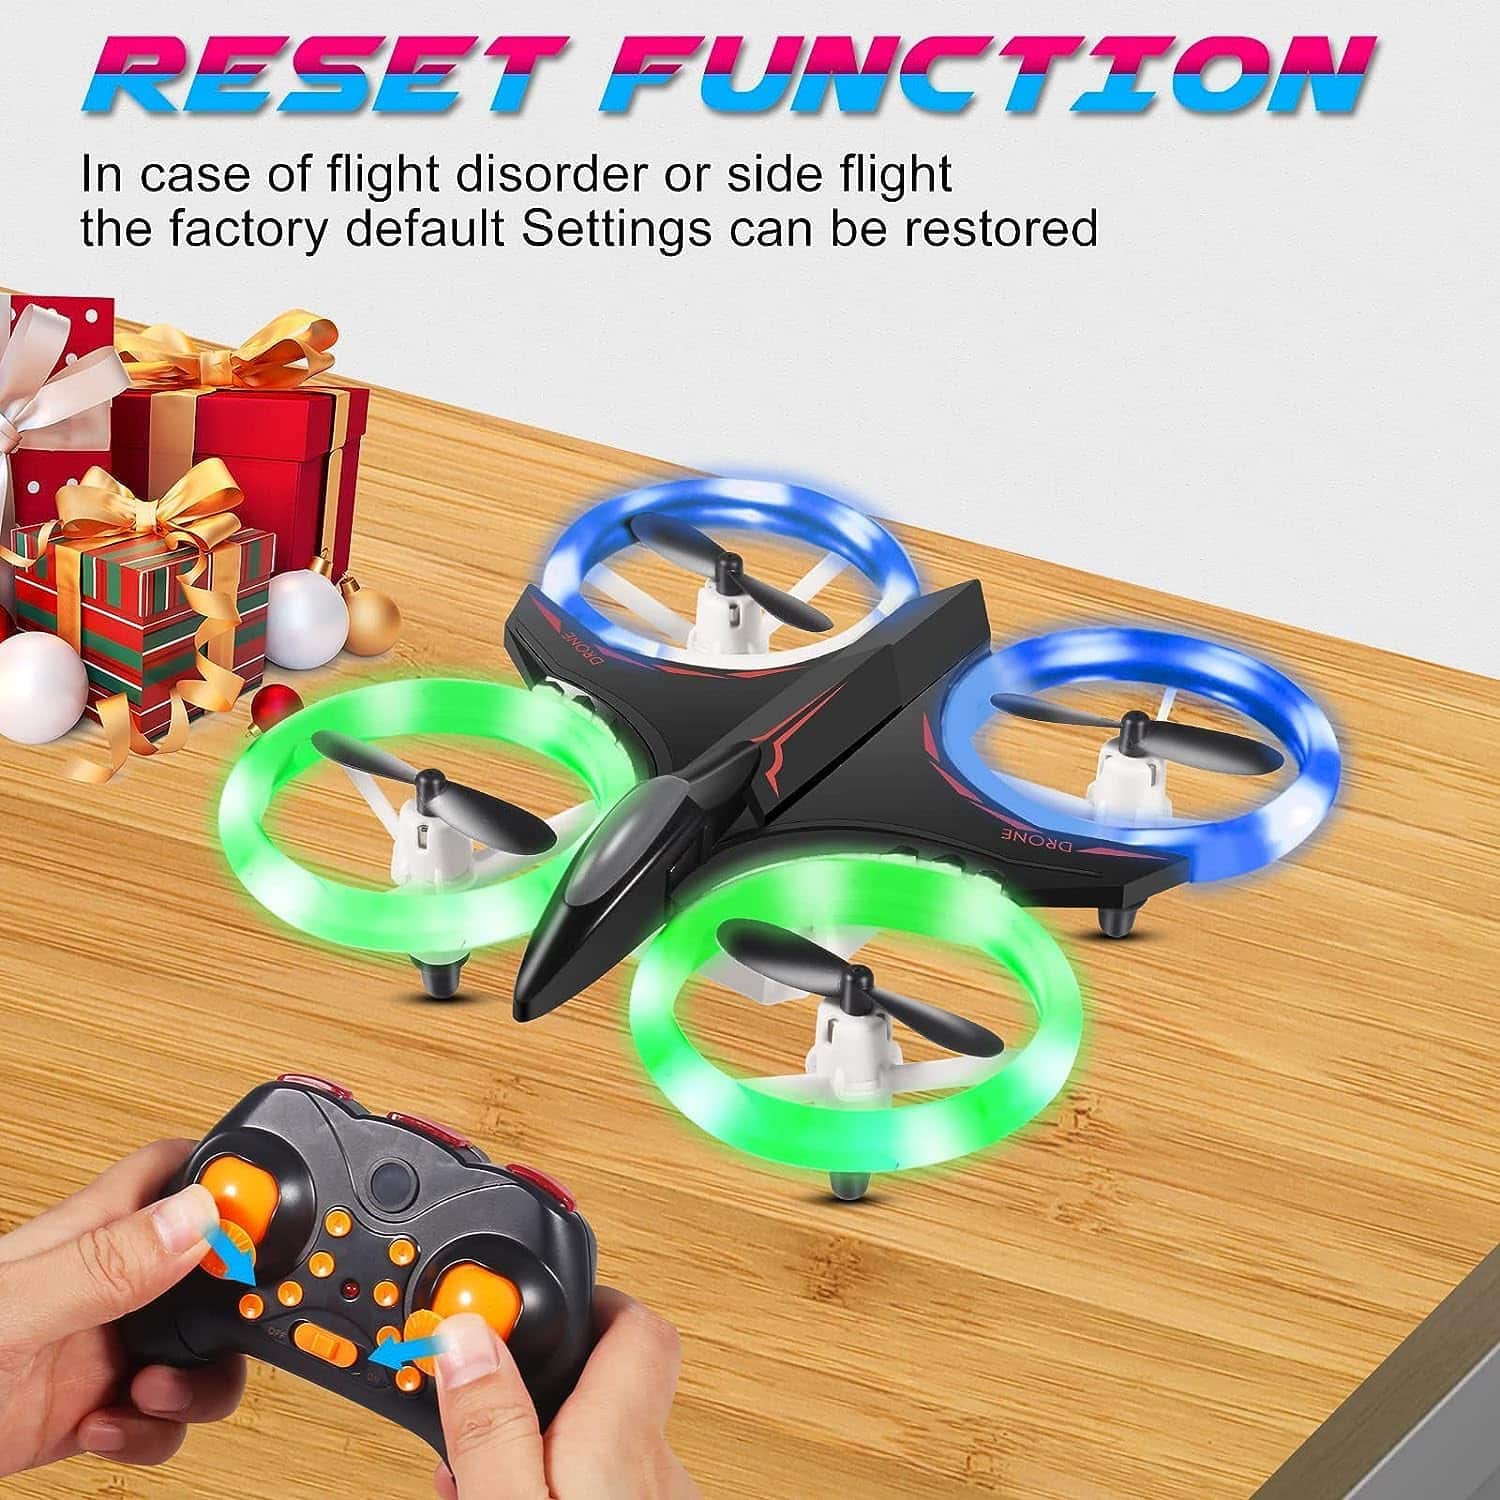 Mini Drone with LED Light: A Fun and Exciting RC Drone for Kids